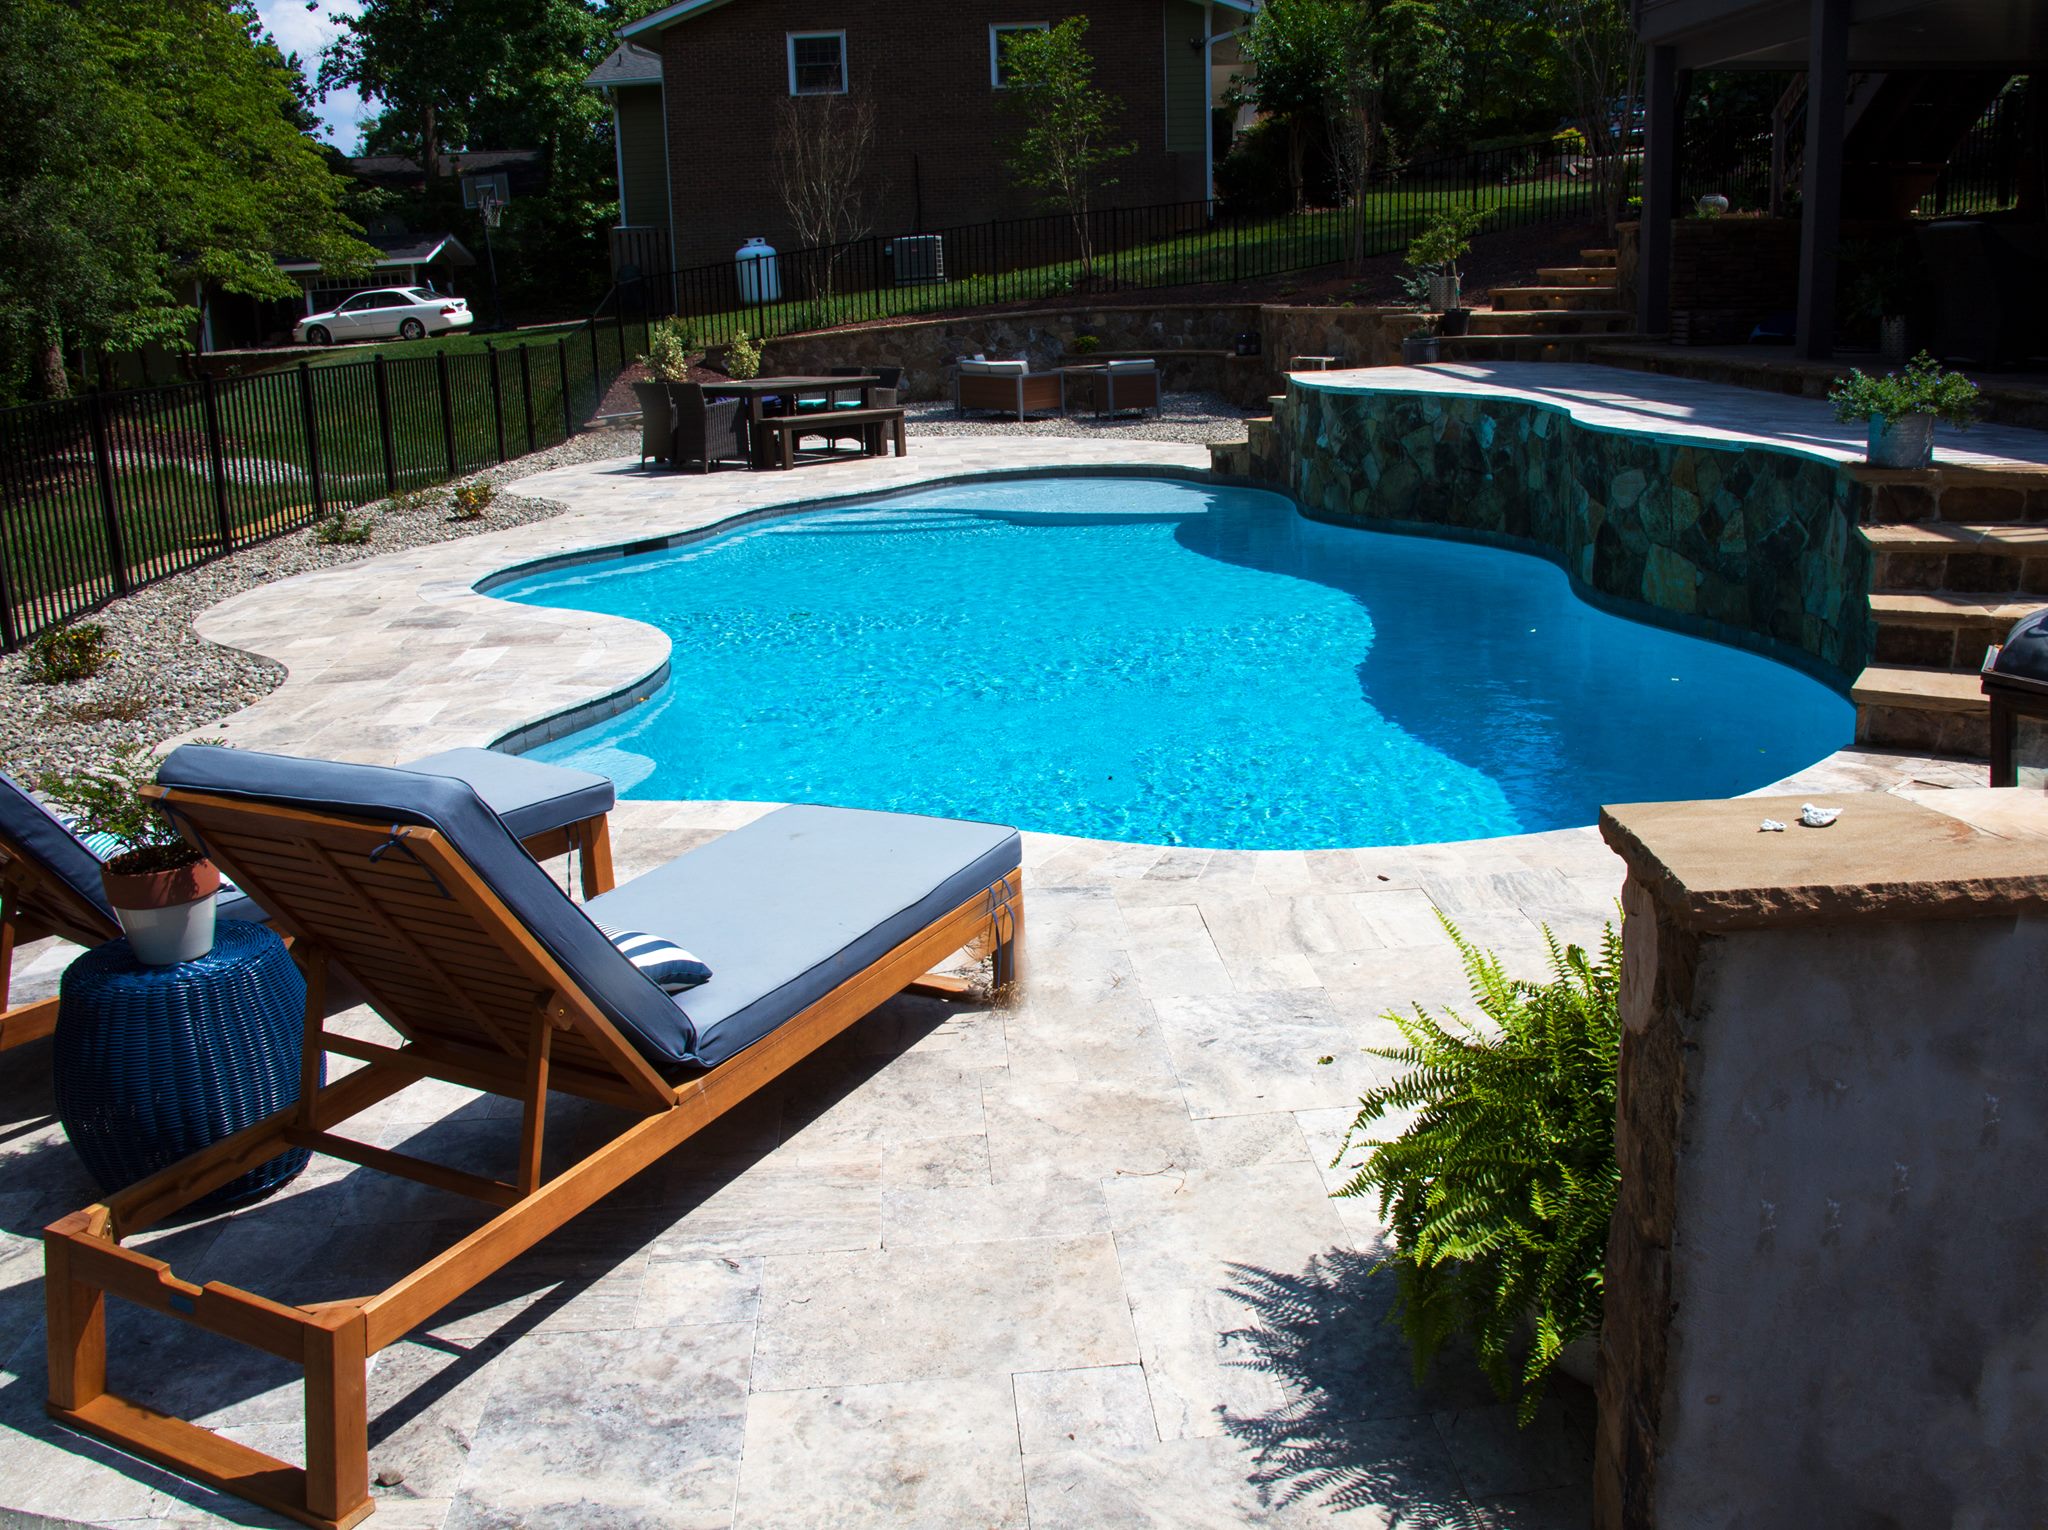 Install Concrete Inground Pools in Newton Conover North Carolina with CPC 704-799-5236